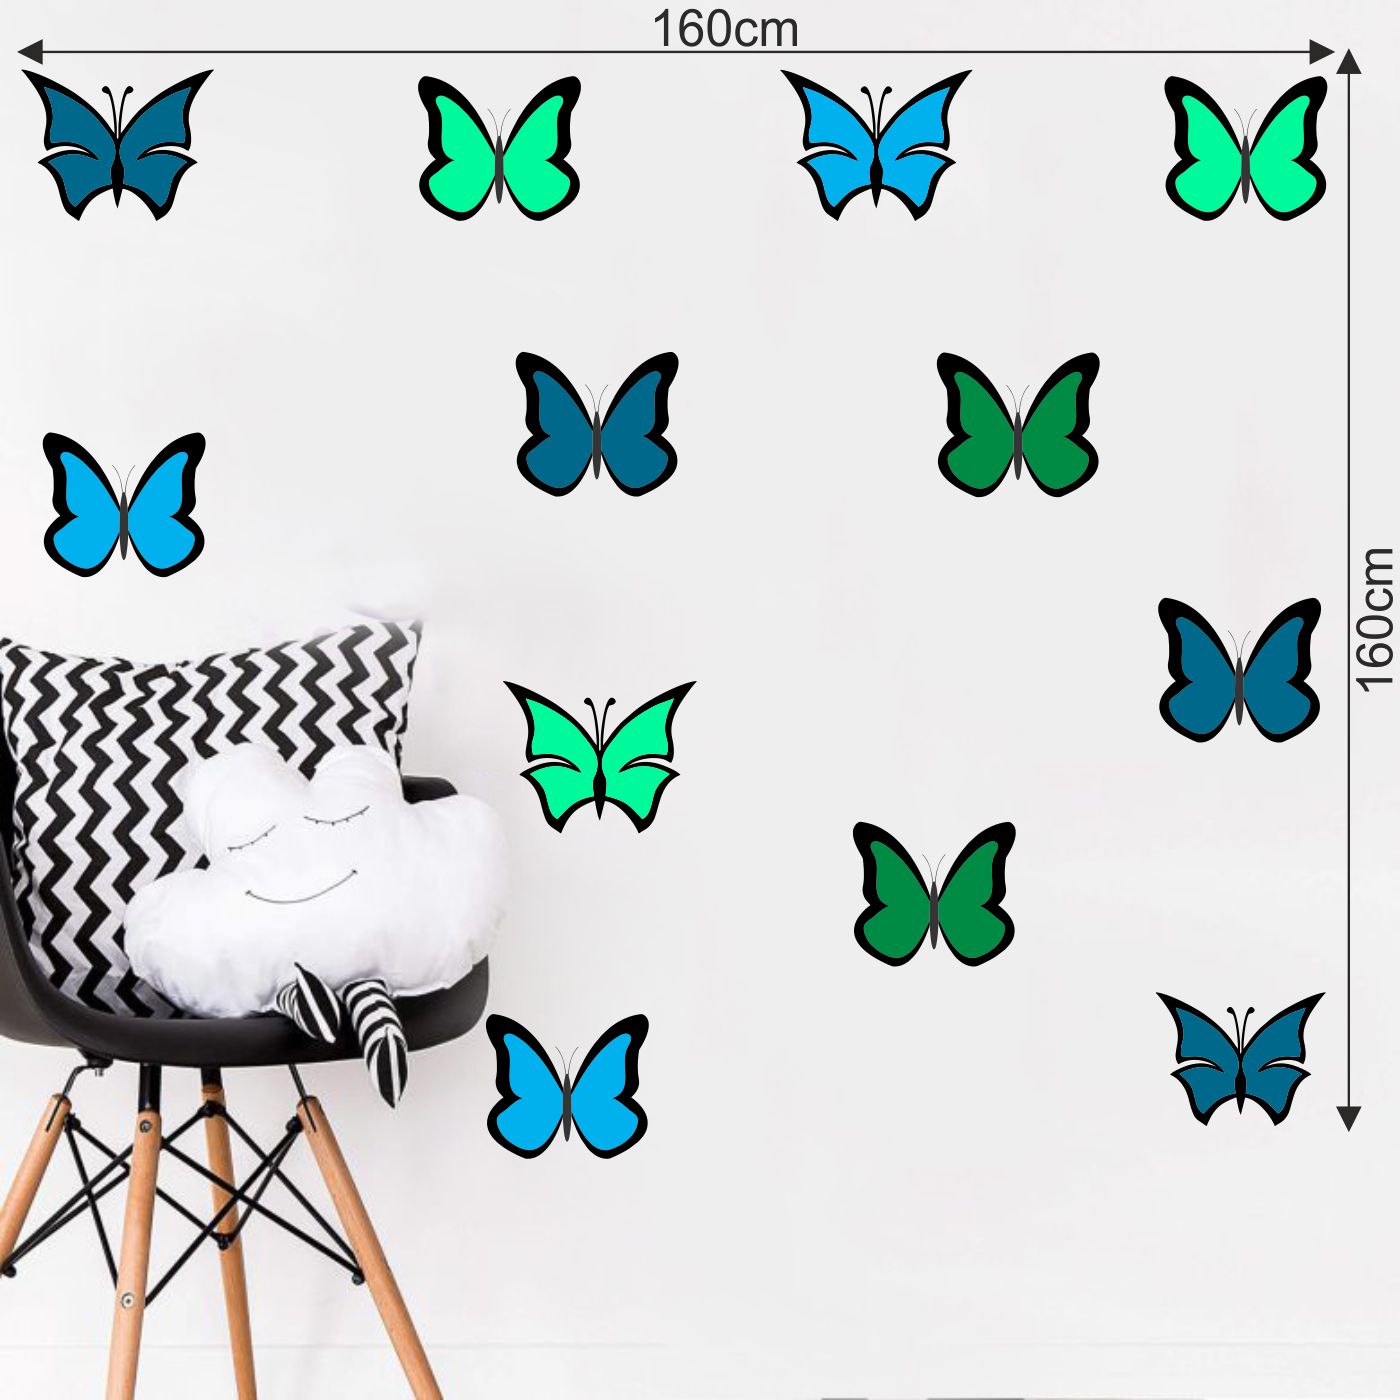 ORKA Butterfly Theme Wall Decal Sticker 28  